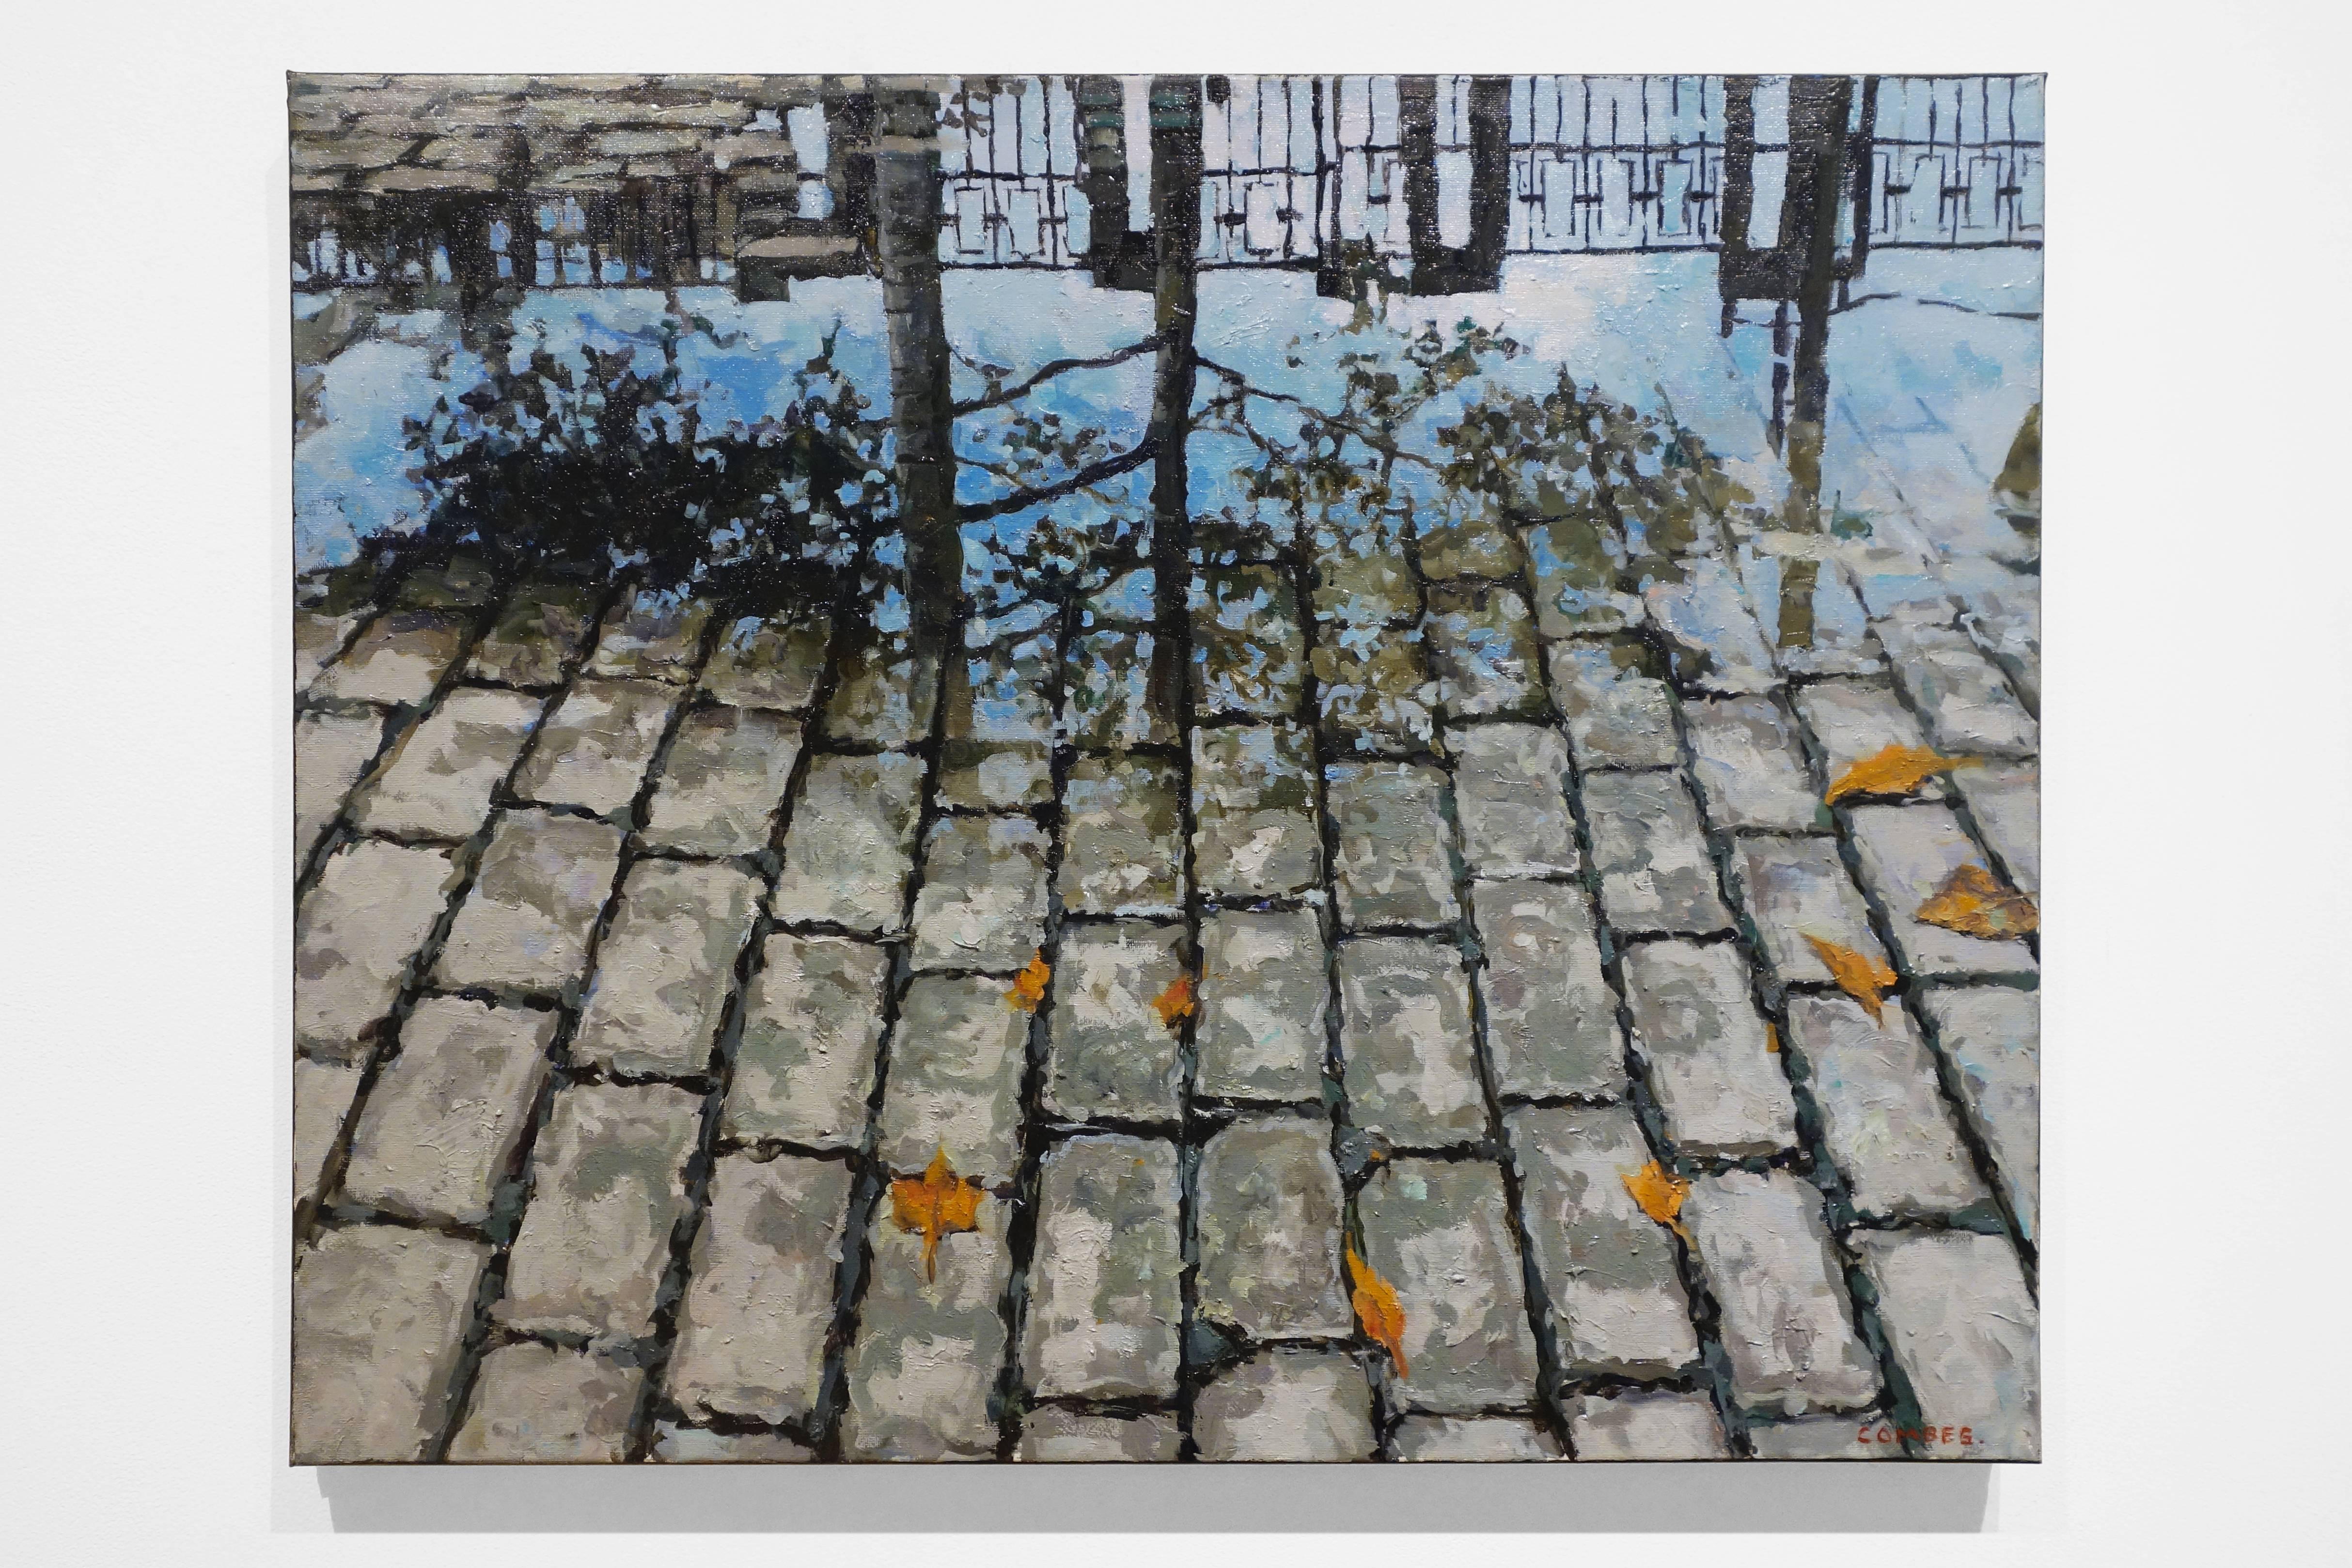 REFLECTED RAILING - Puddle on Cobblestone / Hyper-realism / Reflection in water - Painting by Richard Combes